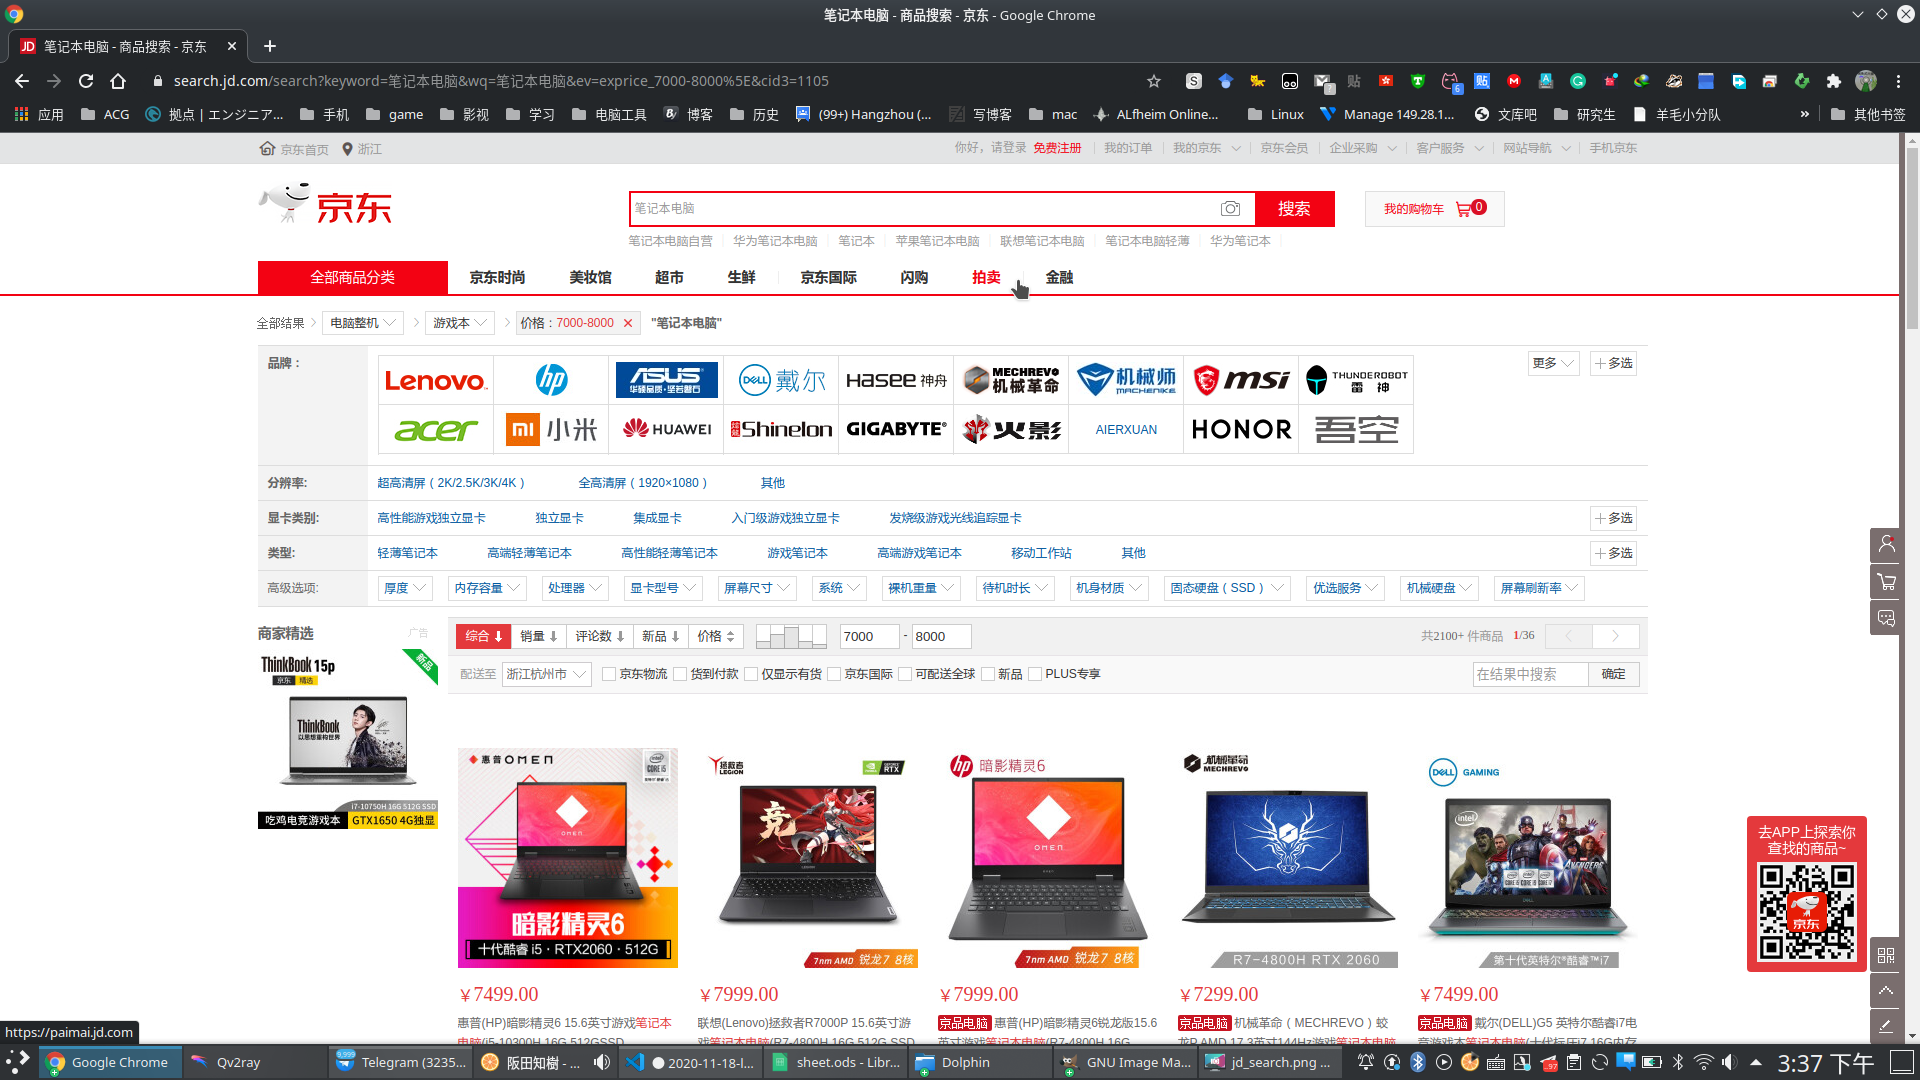 JD.com page for laptops between 7000-8000